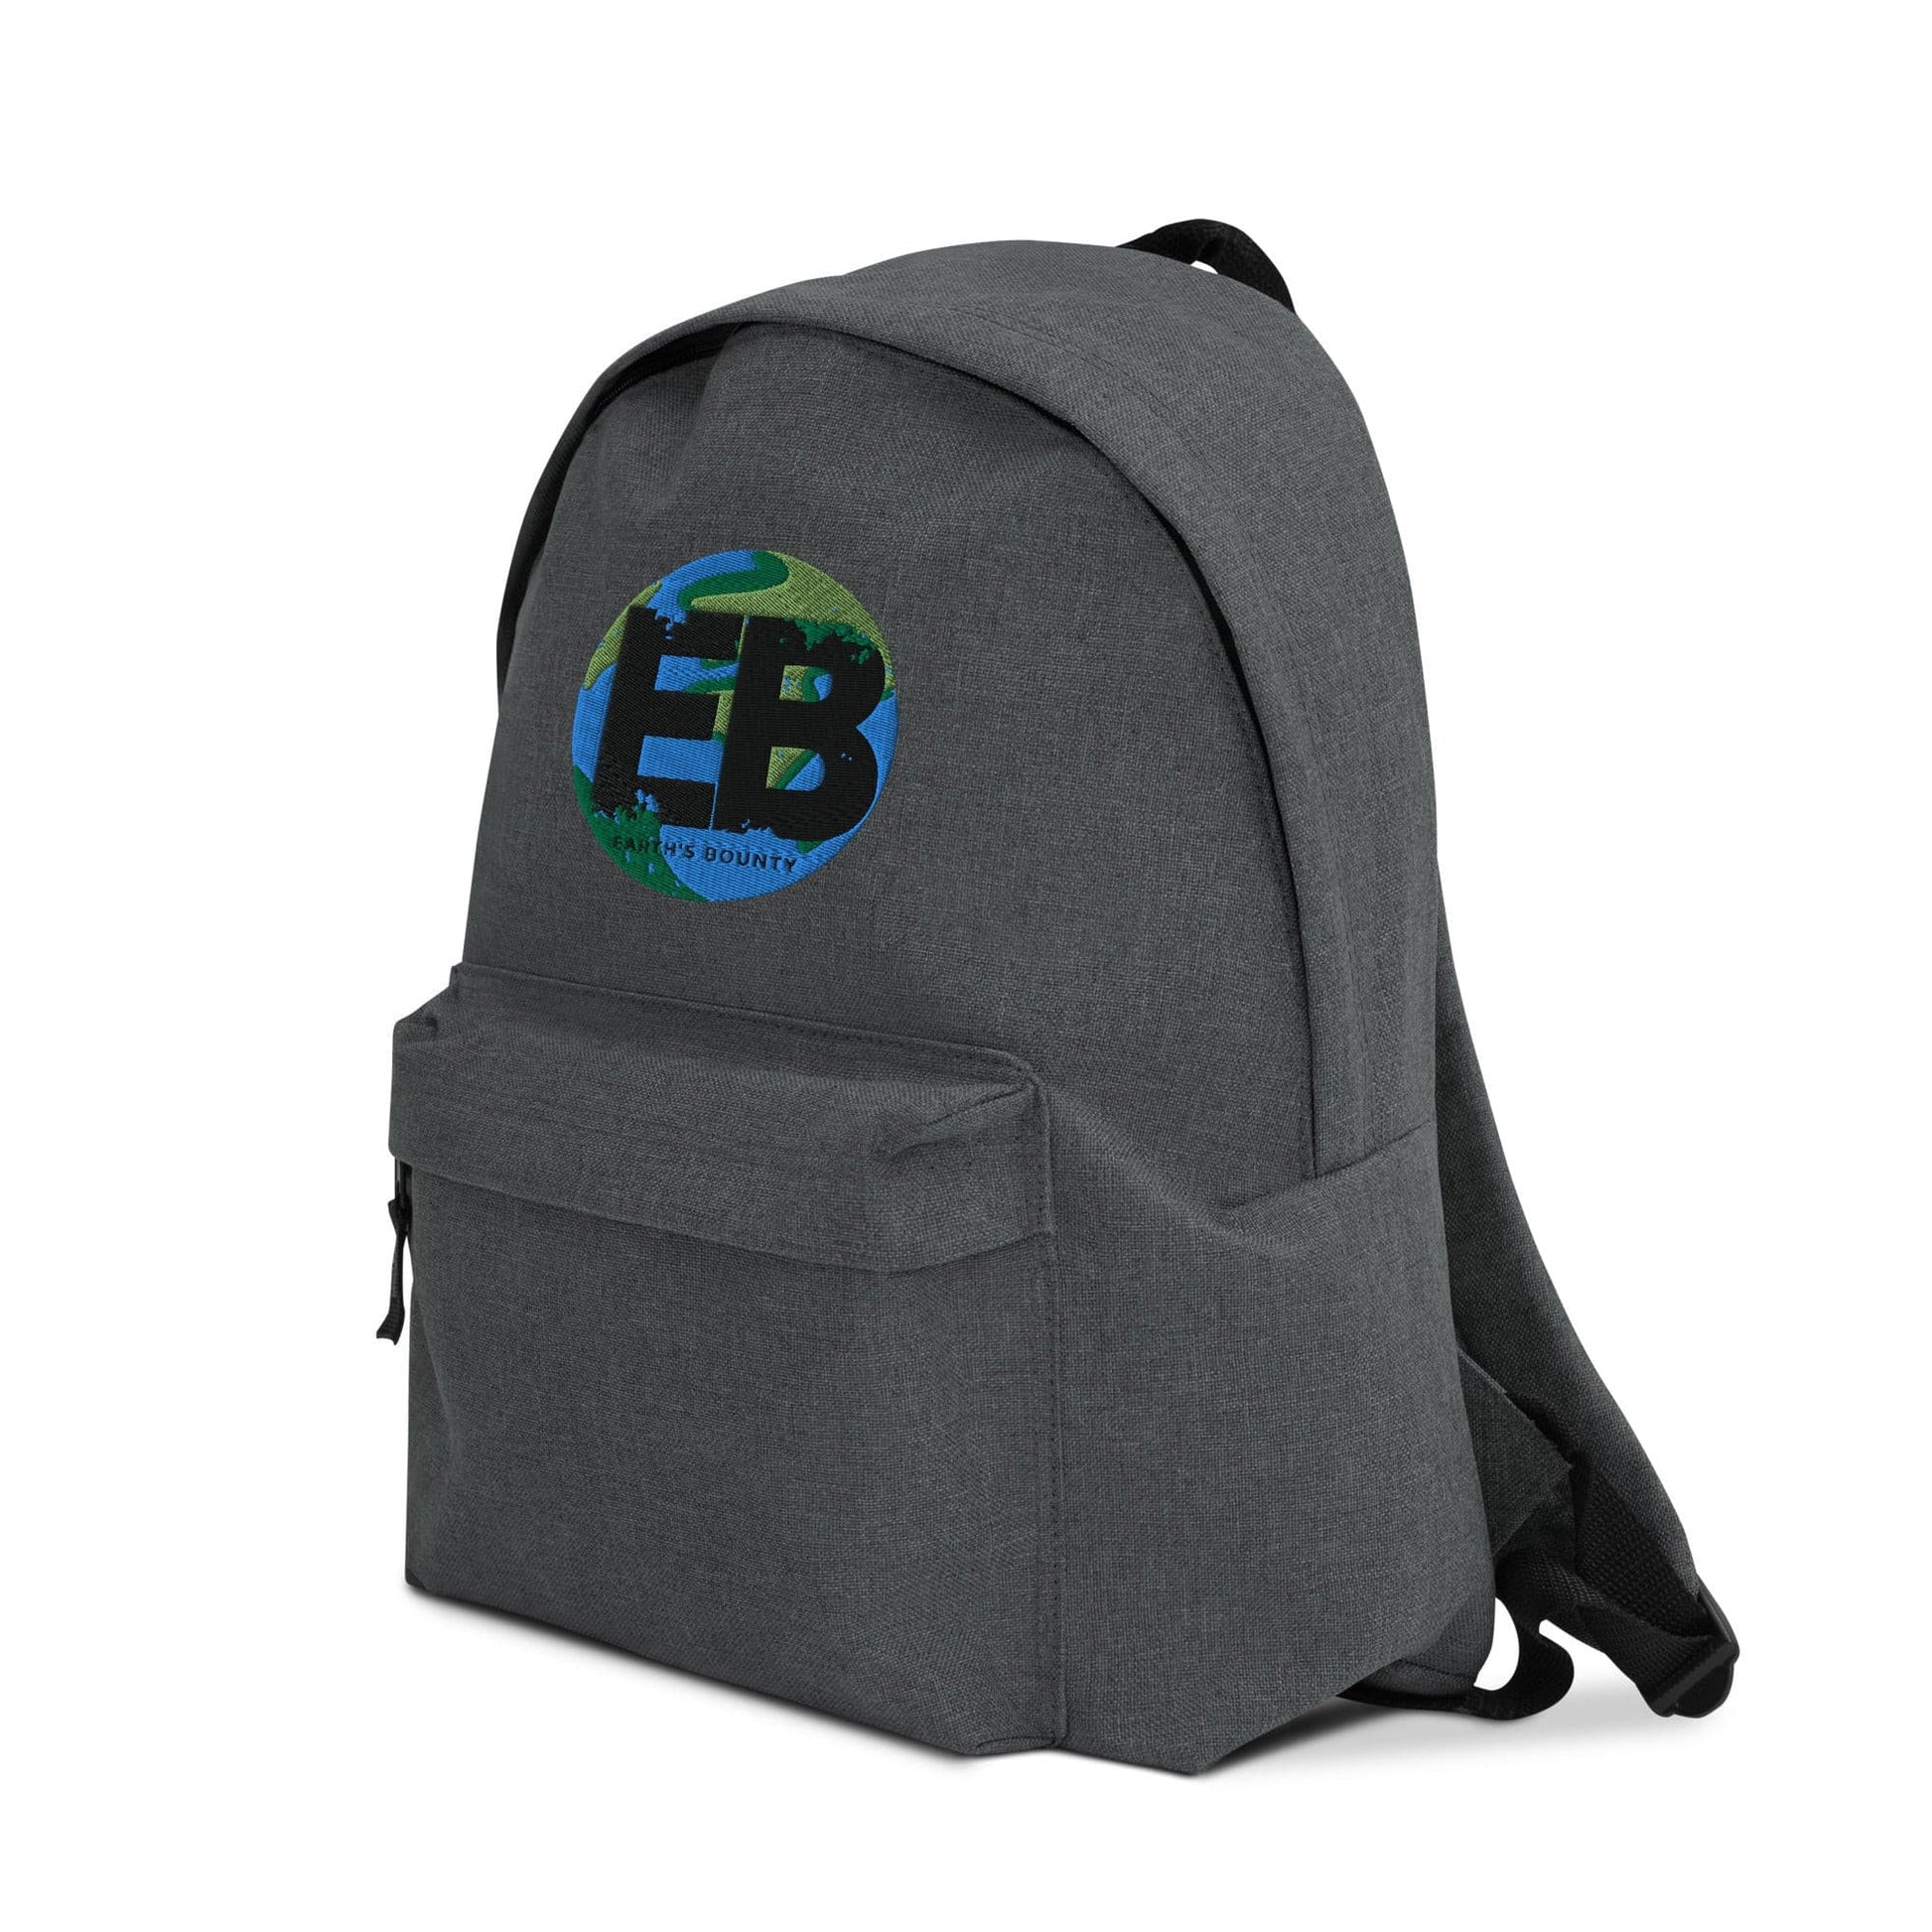 EB Embroidered Backpack.